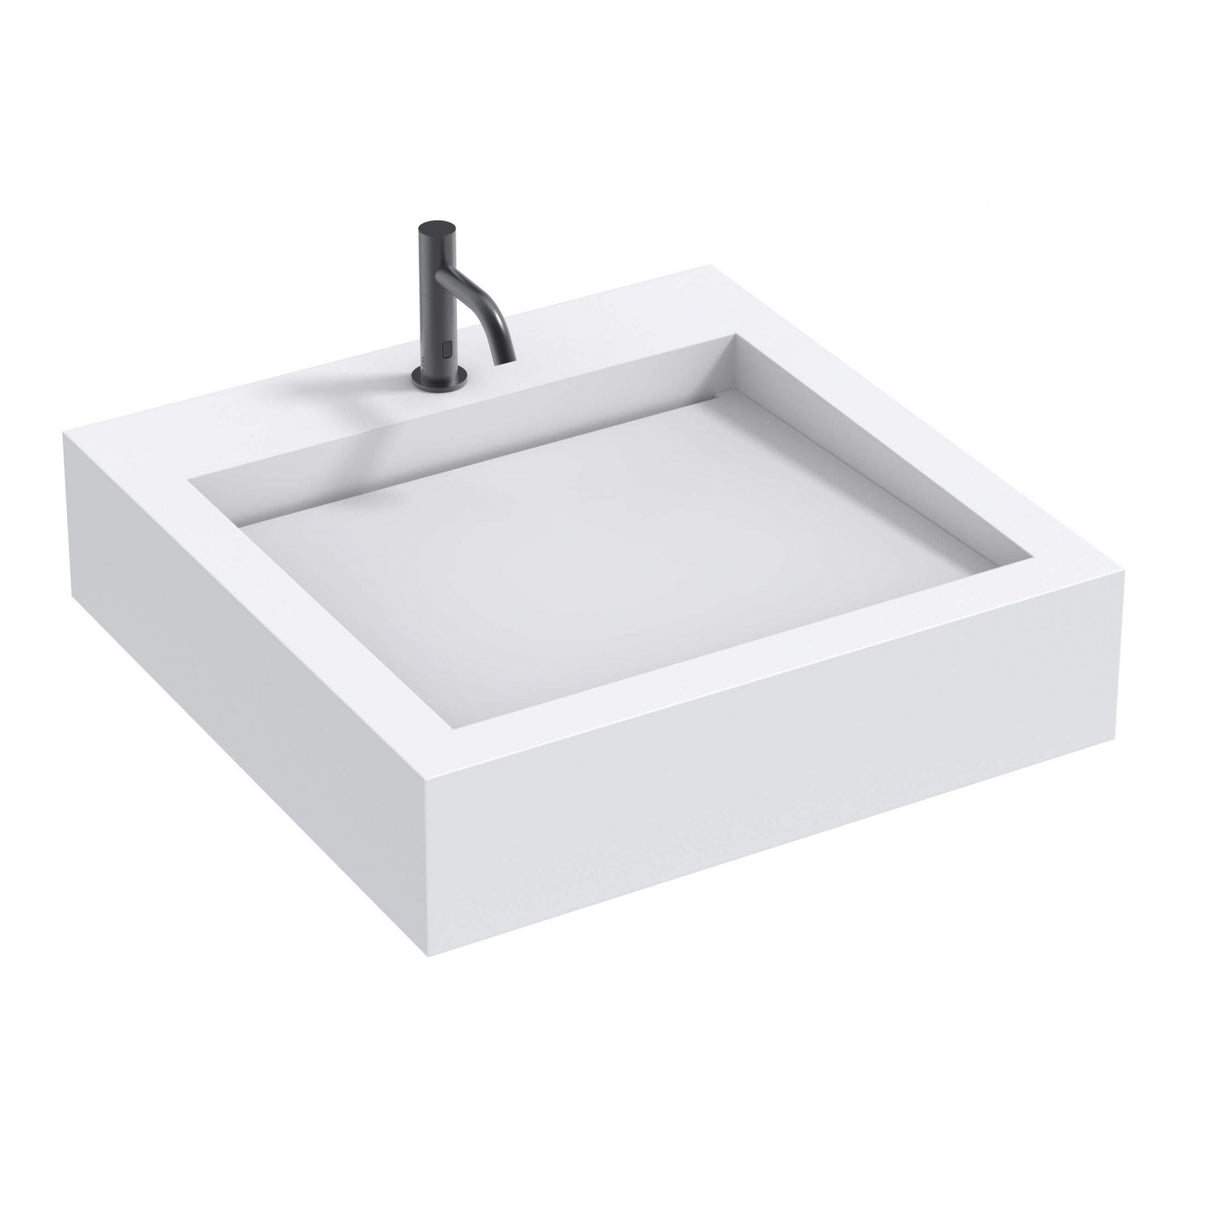 The Monolith S, M or L Series Wall Mounted Wash Basin L.600mm (300, 450 or 600mm Depth)